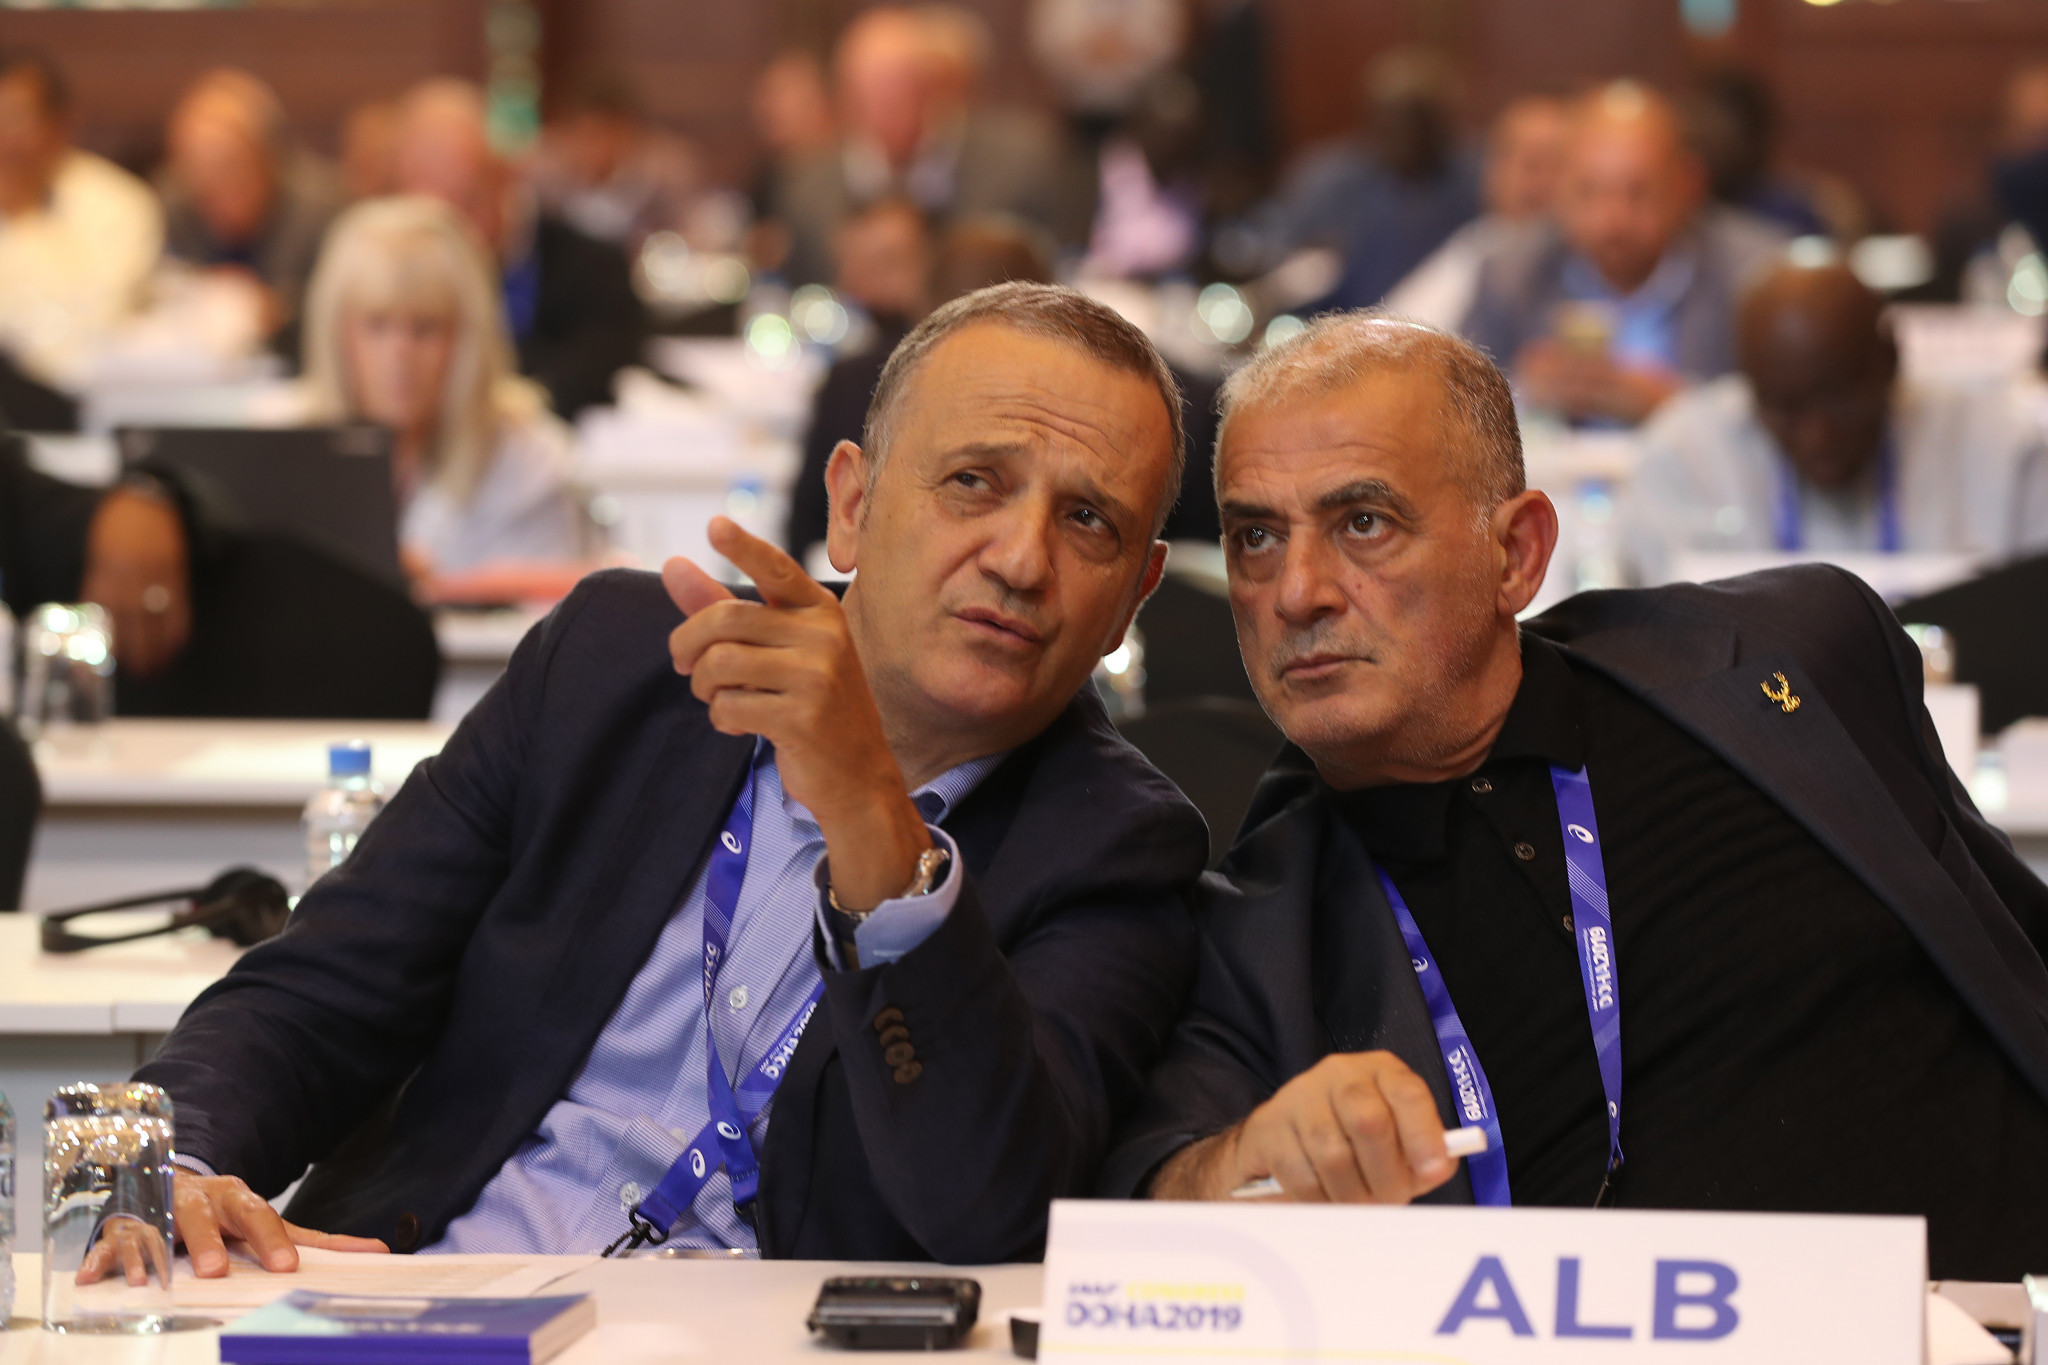 A delegation from Albania were among those attending the IAAF Congress ©Getty Images